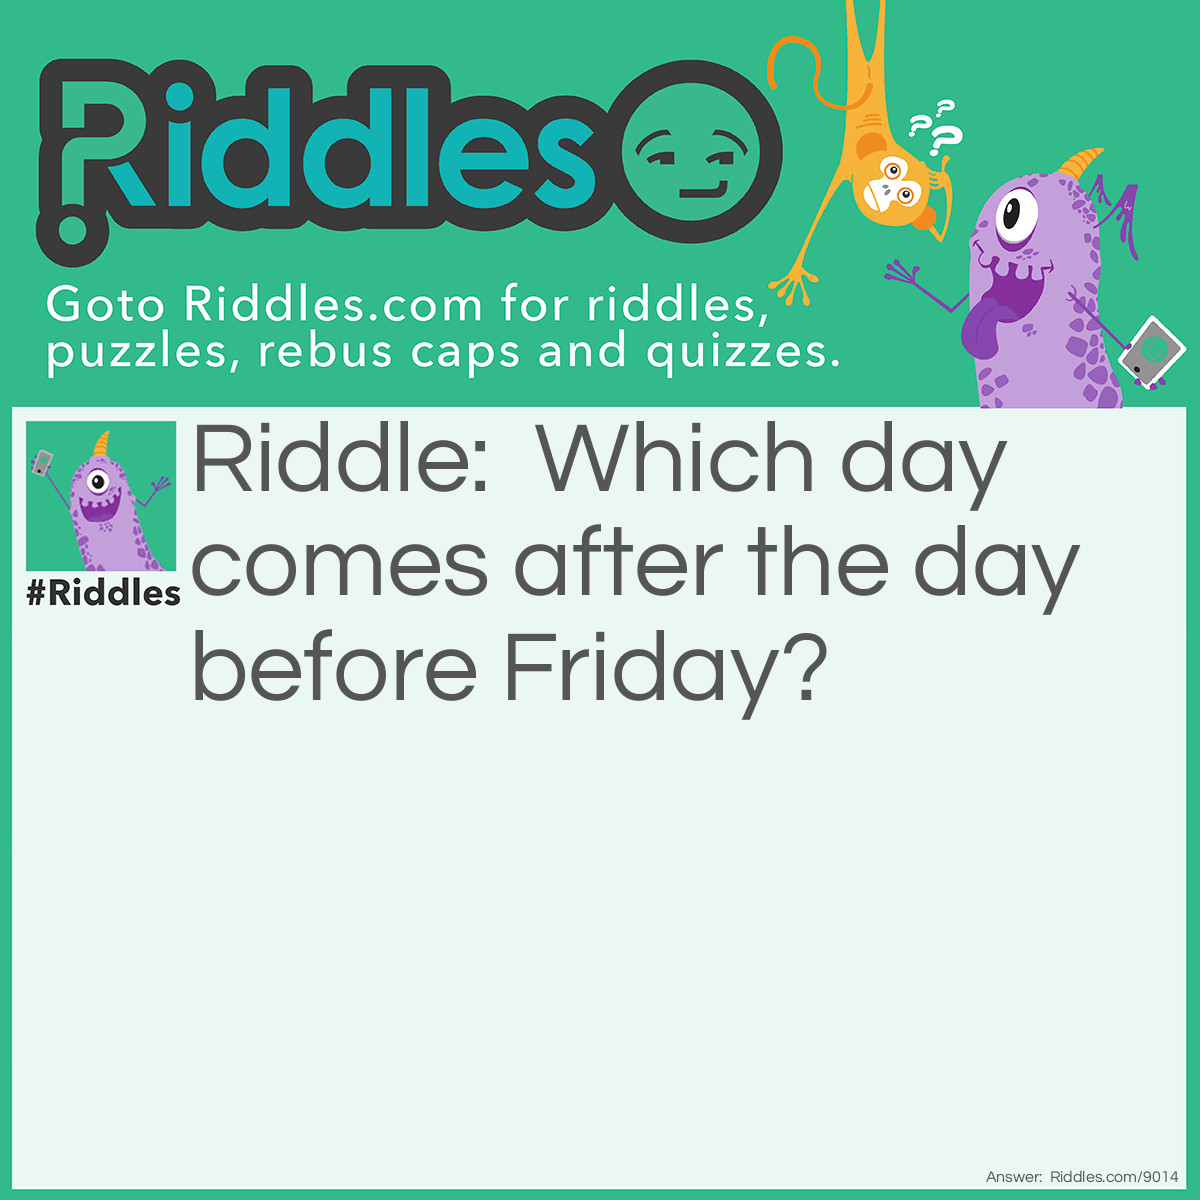 Riddle: Which day comes after the day before Friday? Answer: That day is Friday